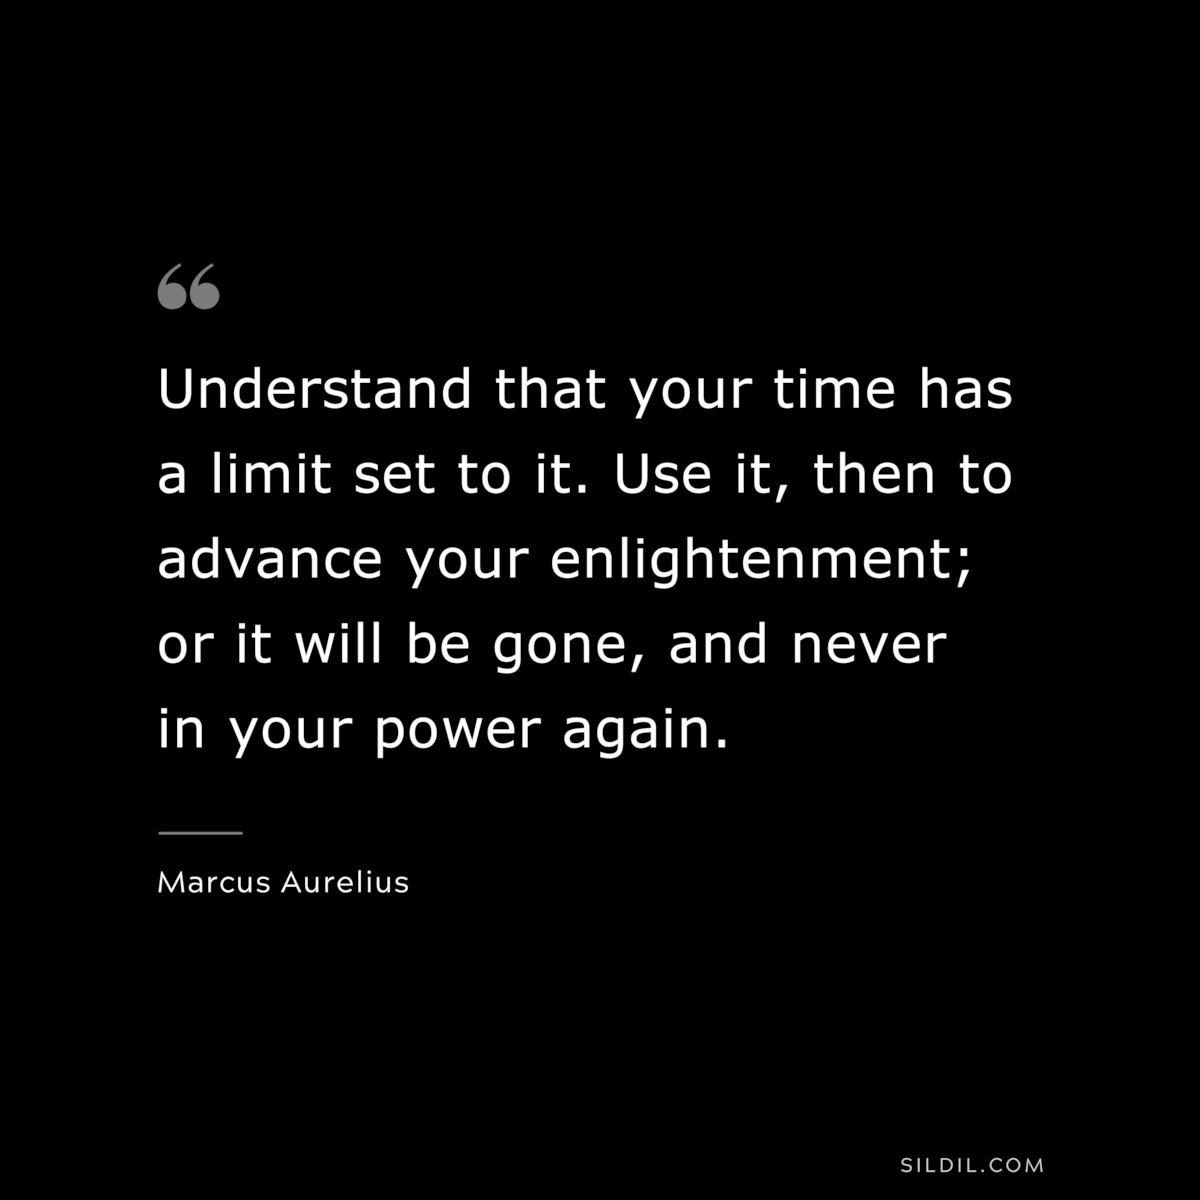 Understand that your time has a limit set to it. Use it, then to advance your enlightenment; or it will be gone, and never in your power again. ― Marcus Aurelius